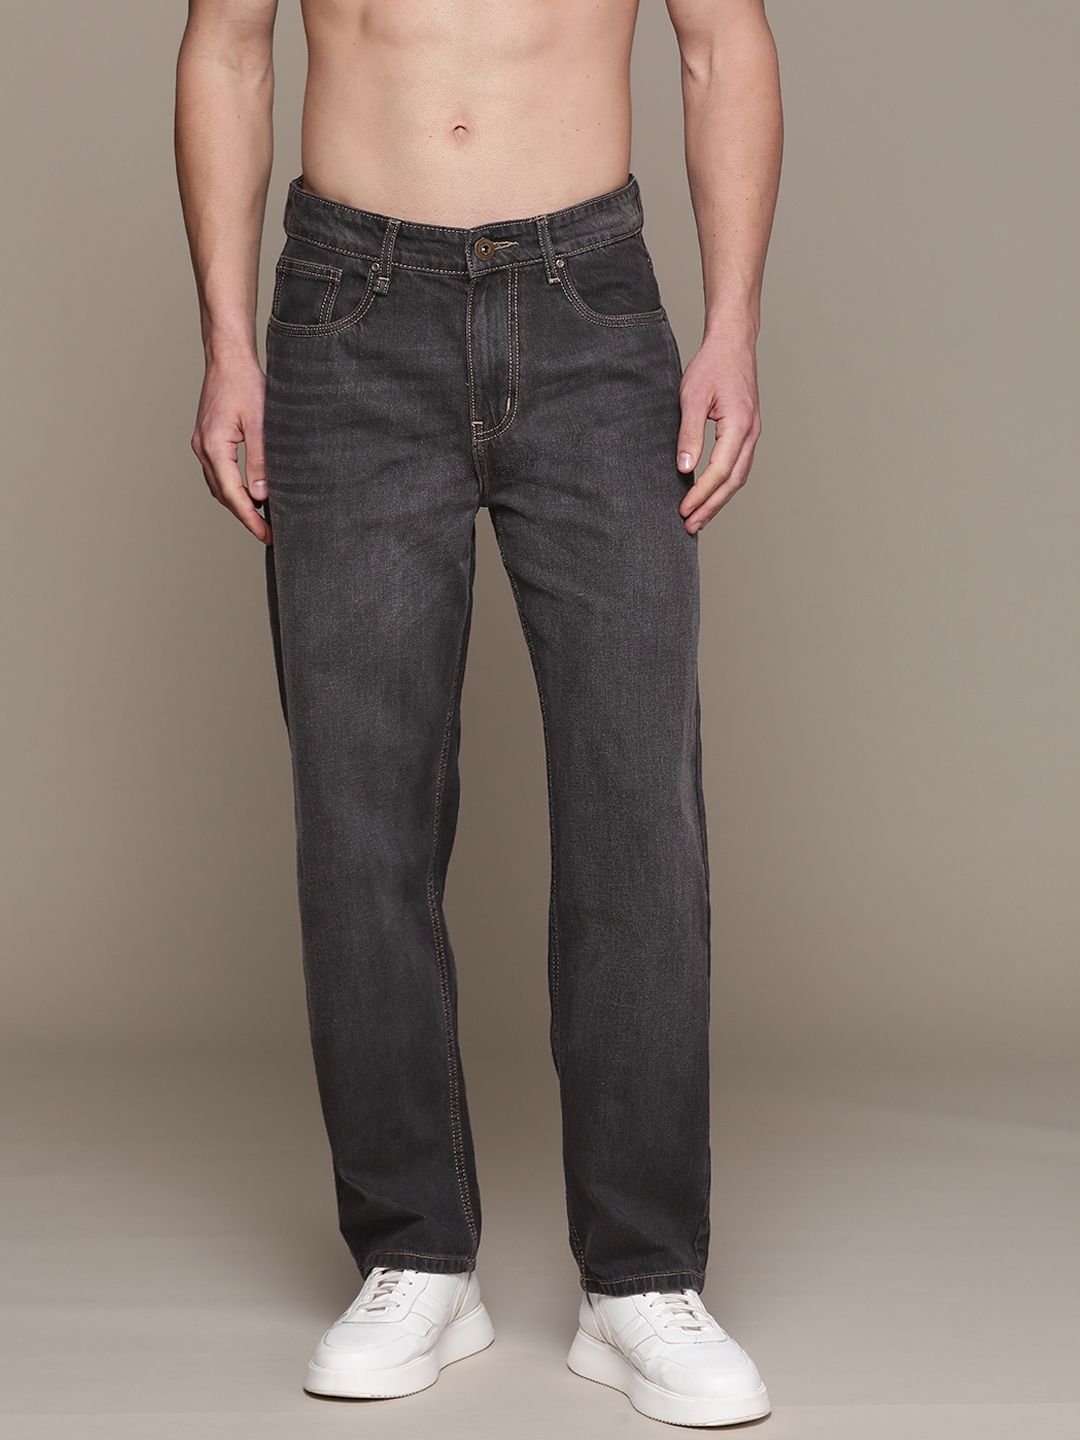 Roadster Men Relaxed Fit Stretchable Jeans